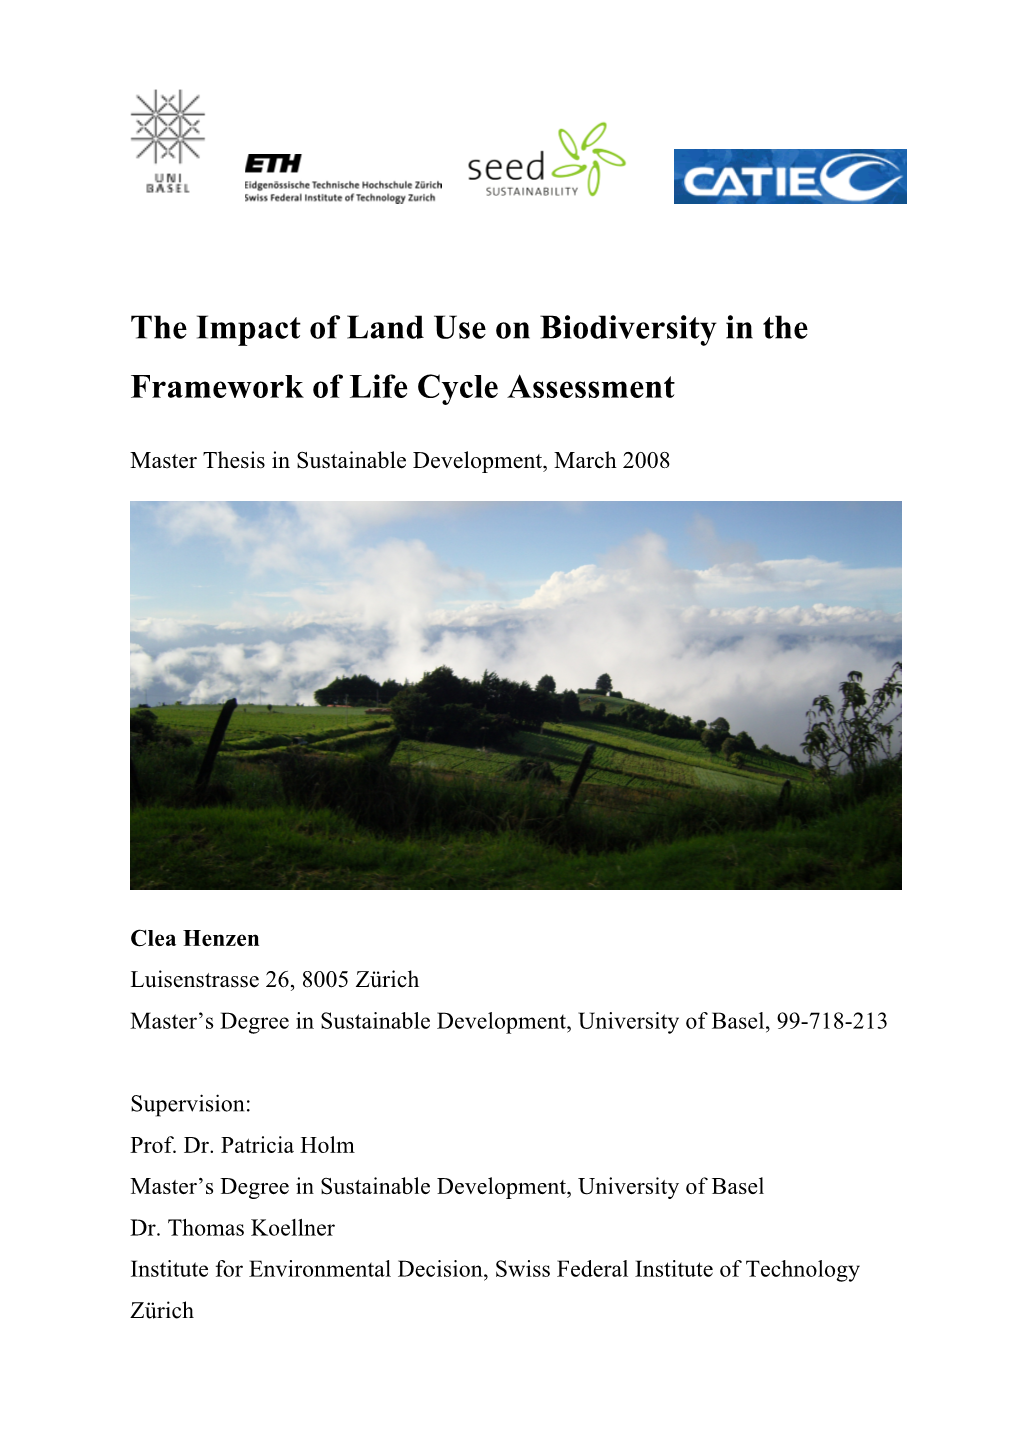 The Impact of Land Use on Biodiversity in the Framework of Life Cycle Assessment